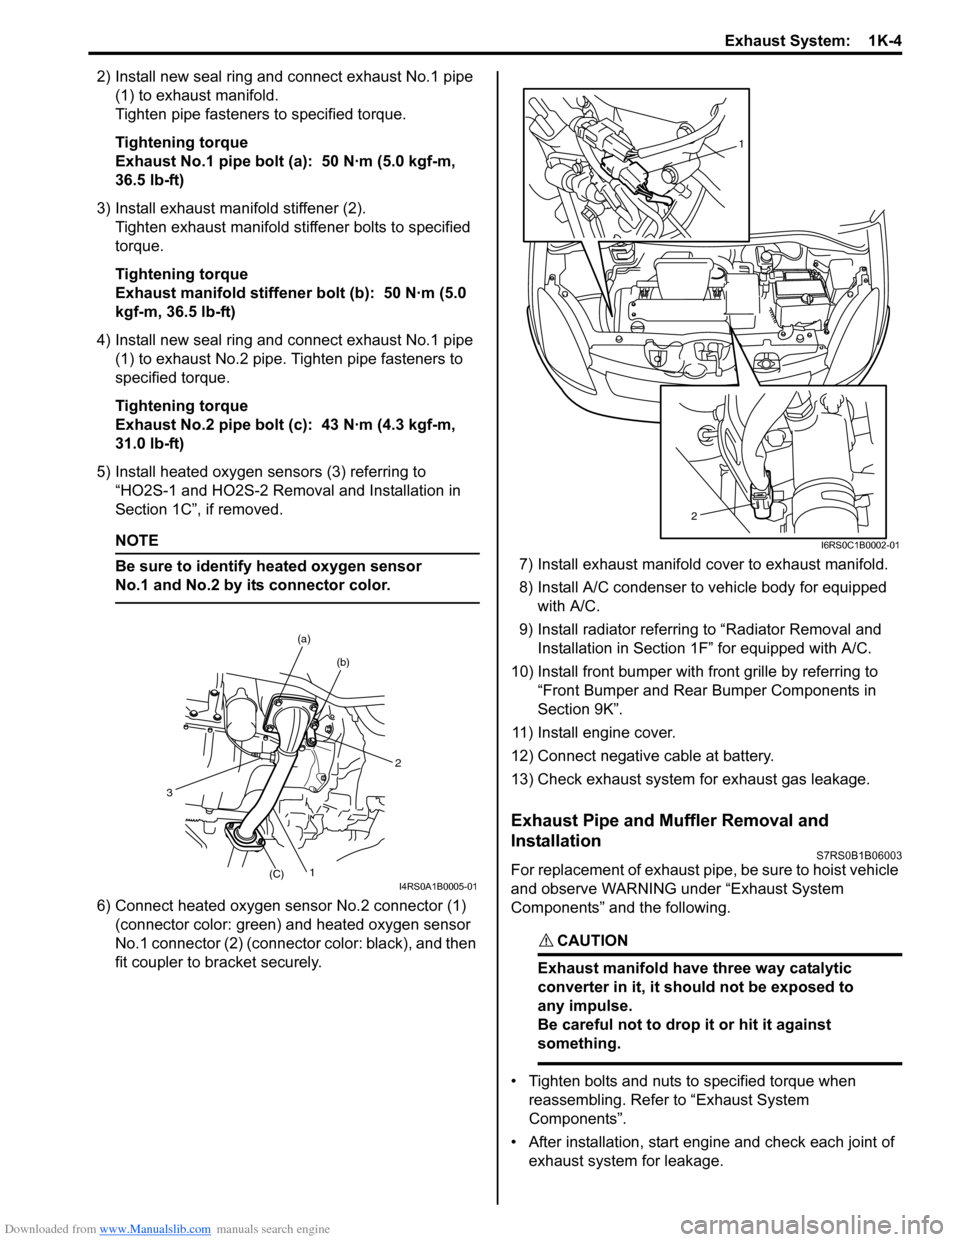 SUZUKI SWIFT 2006 2.G Service Workshop Manual Downloaded from www.Manualslib.com manuals search engine Exhaust System:  1K-4
2) Install new seal ring and connect exhaust No.1 pipe (1) to exhaust manifold.
Tighten pipe fasteners to specified torqu